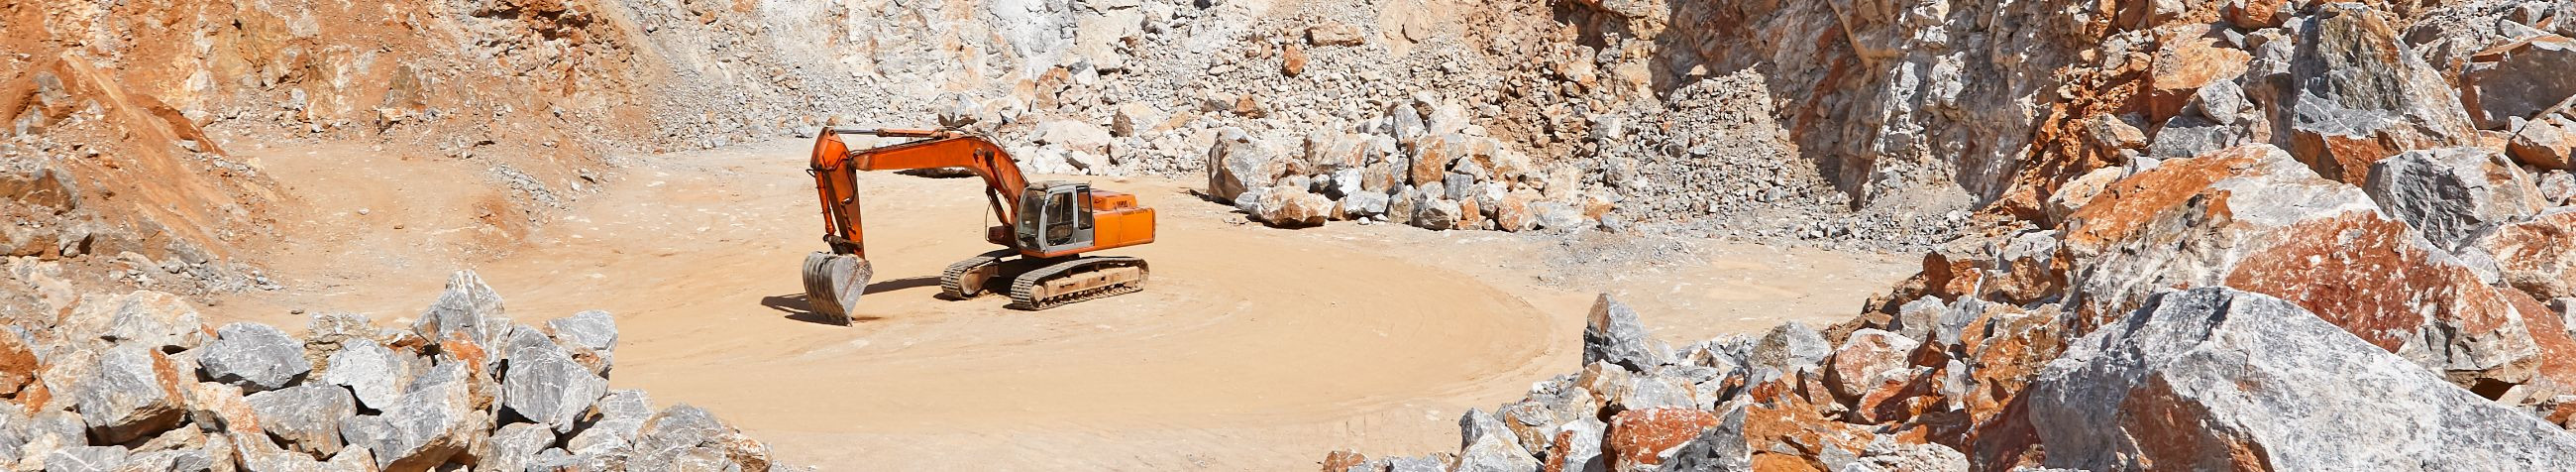 excavation, removal of soil, tidying the soil, preparation of the construction site, soil stabilization, excavation planning, the digging process, well groundwater resistance, use of excavation equipment, excavation work